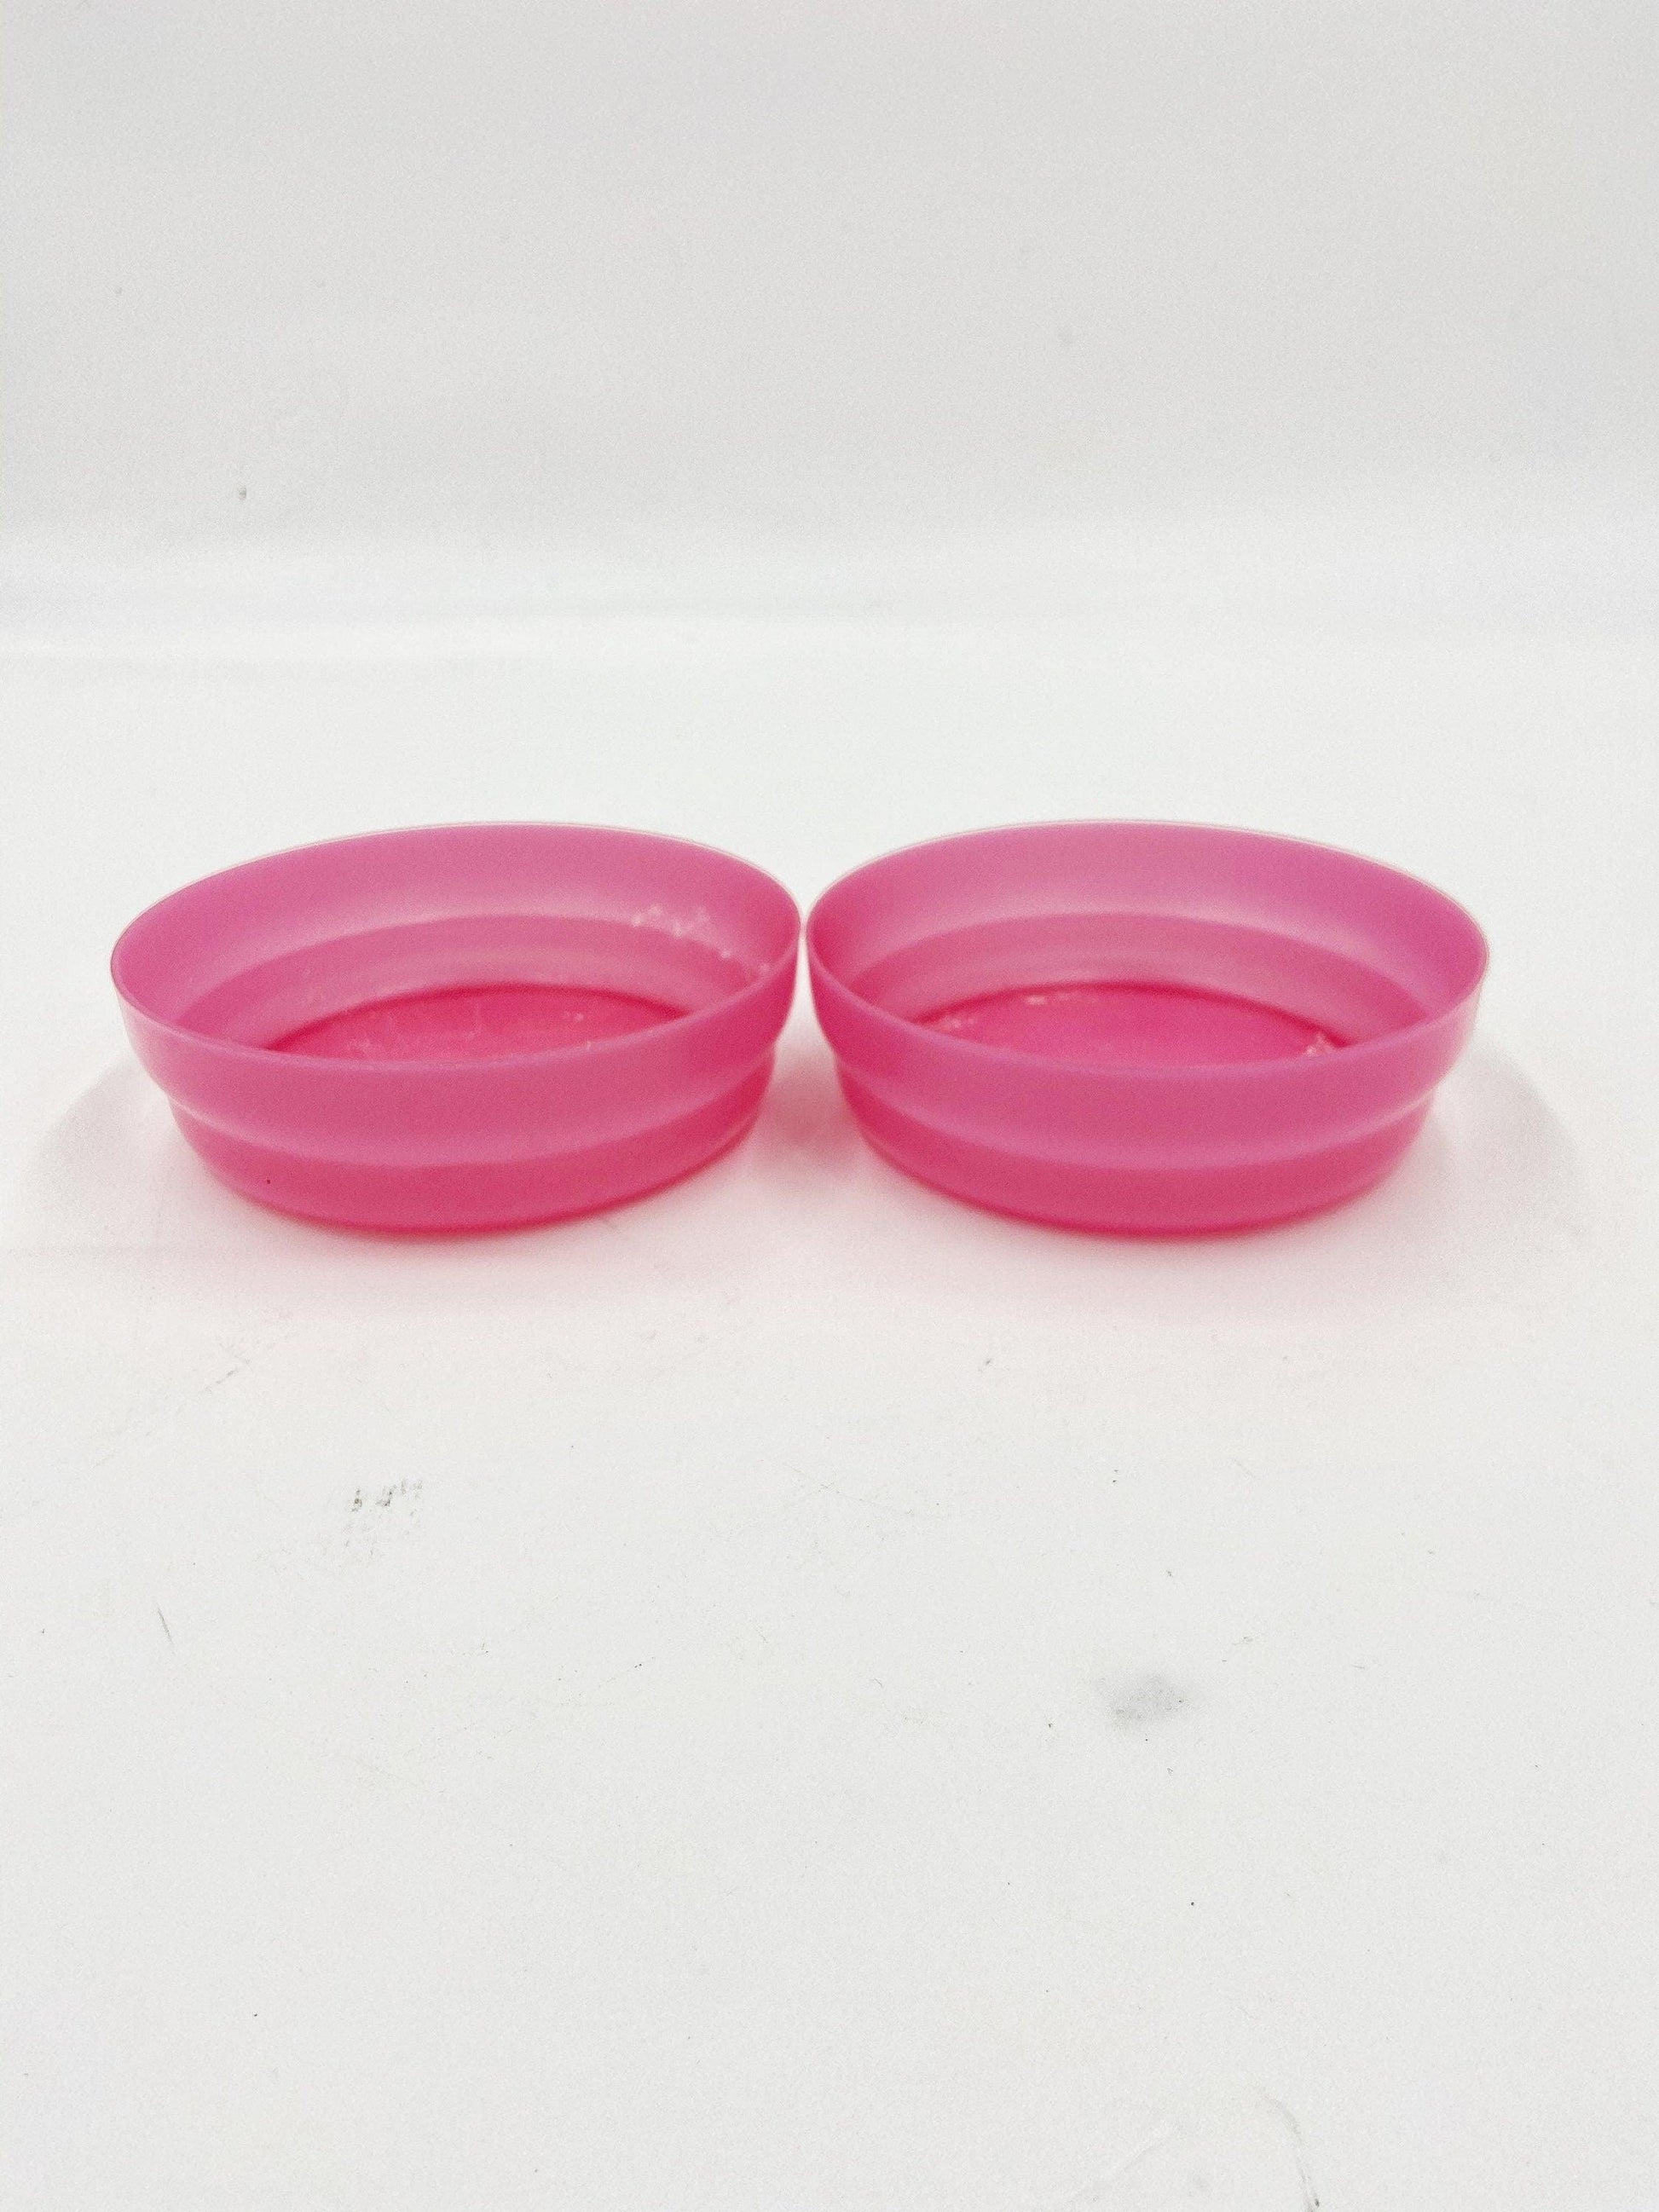 https://funkyhousevintage.com/cdn/shop/files/vintage-pink-tupperware-cereal-bowls-old-tupper-ware-food-storage-retro-kitchen-dining-retro-kitchen-art-deco-located-at-funkyhouse-vintage-antique-store-weiser-idaho-7_5a5dc7fa-d141-4ccd-8929-f21ec71896da.jpg?v=1688592977&width=1946